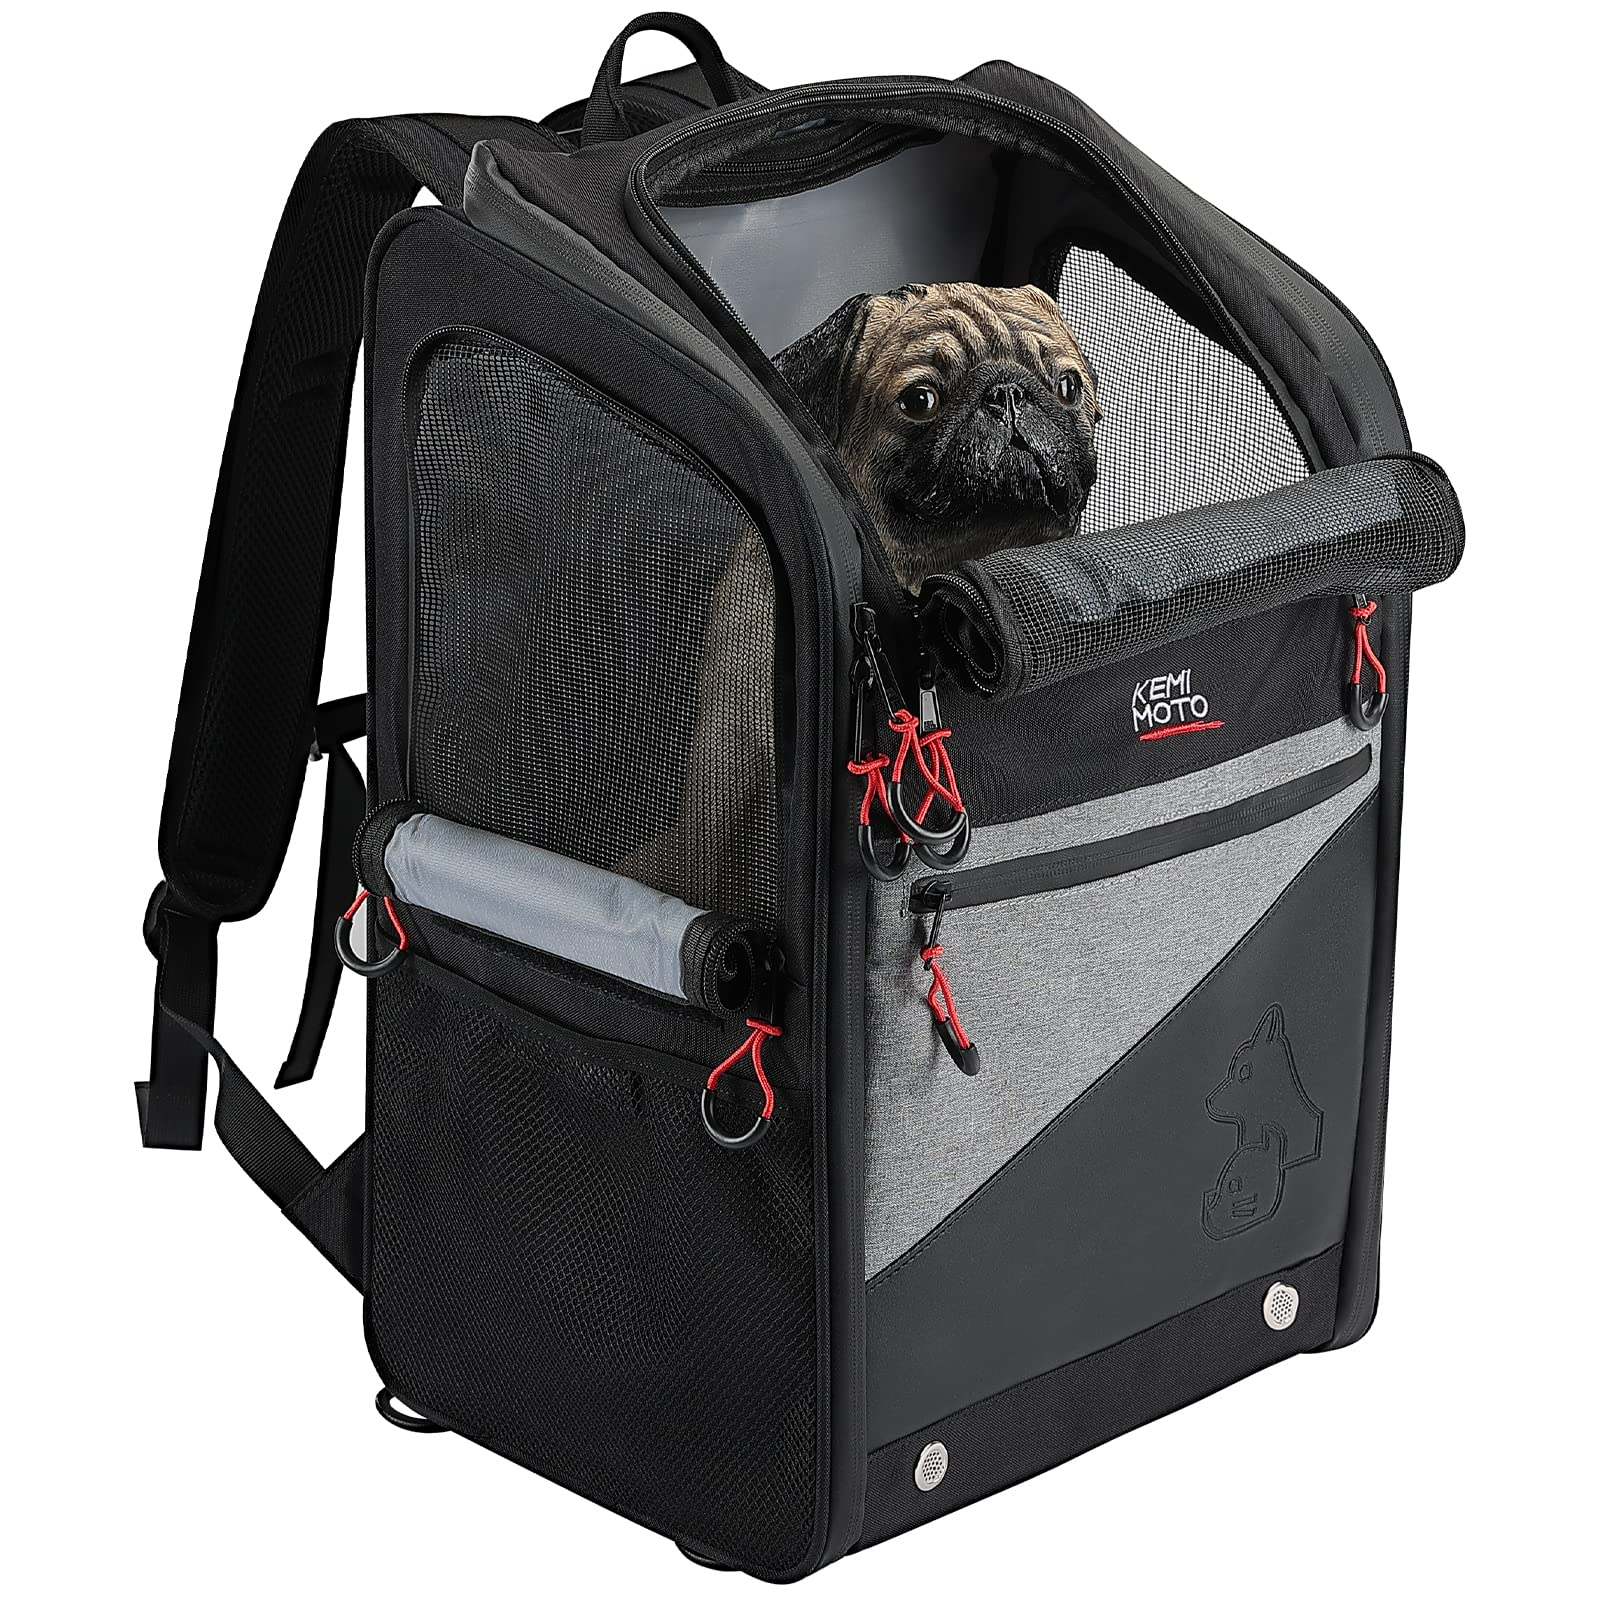 Harley Upgraded Portable Pet Carriers - Kemimoto